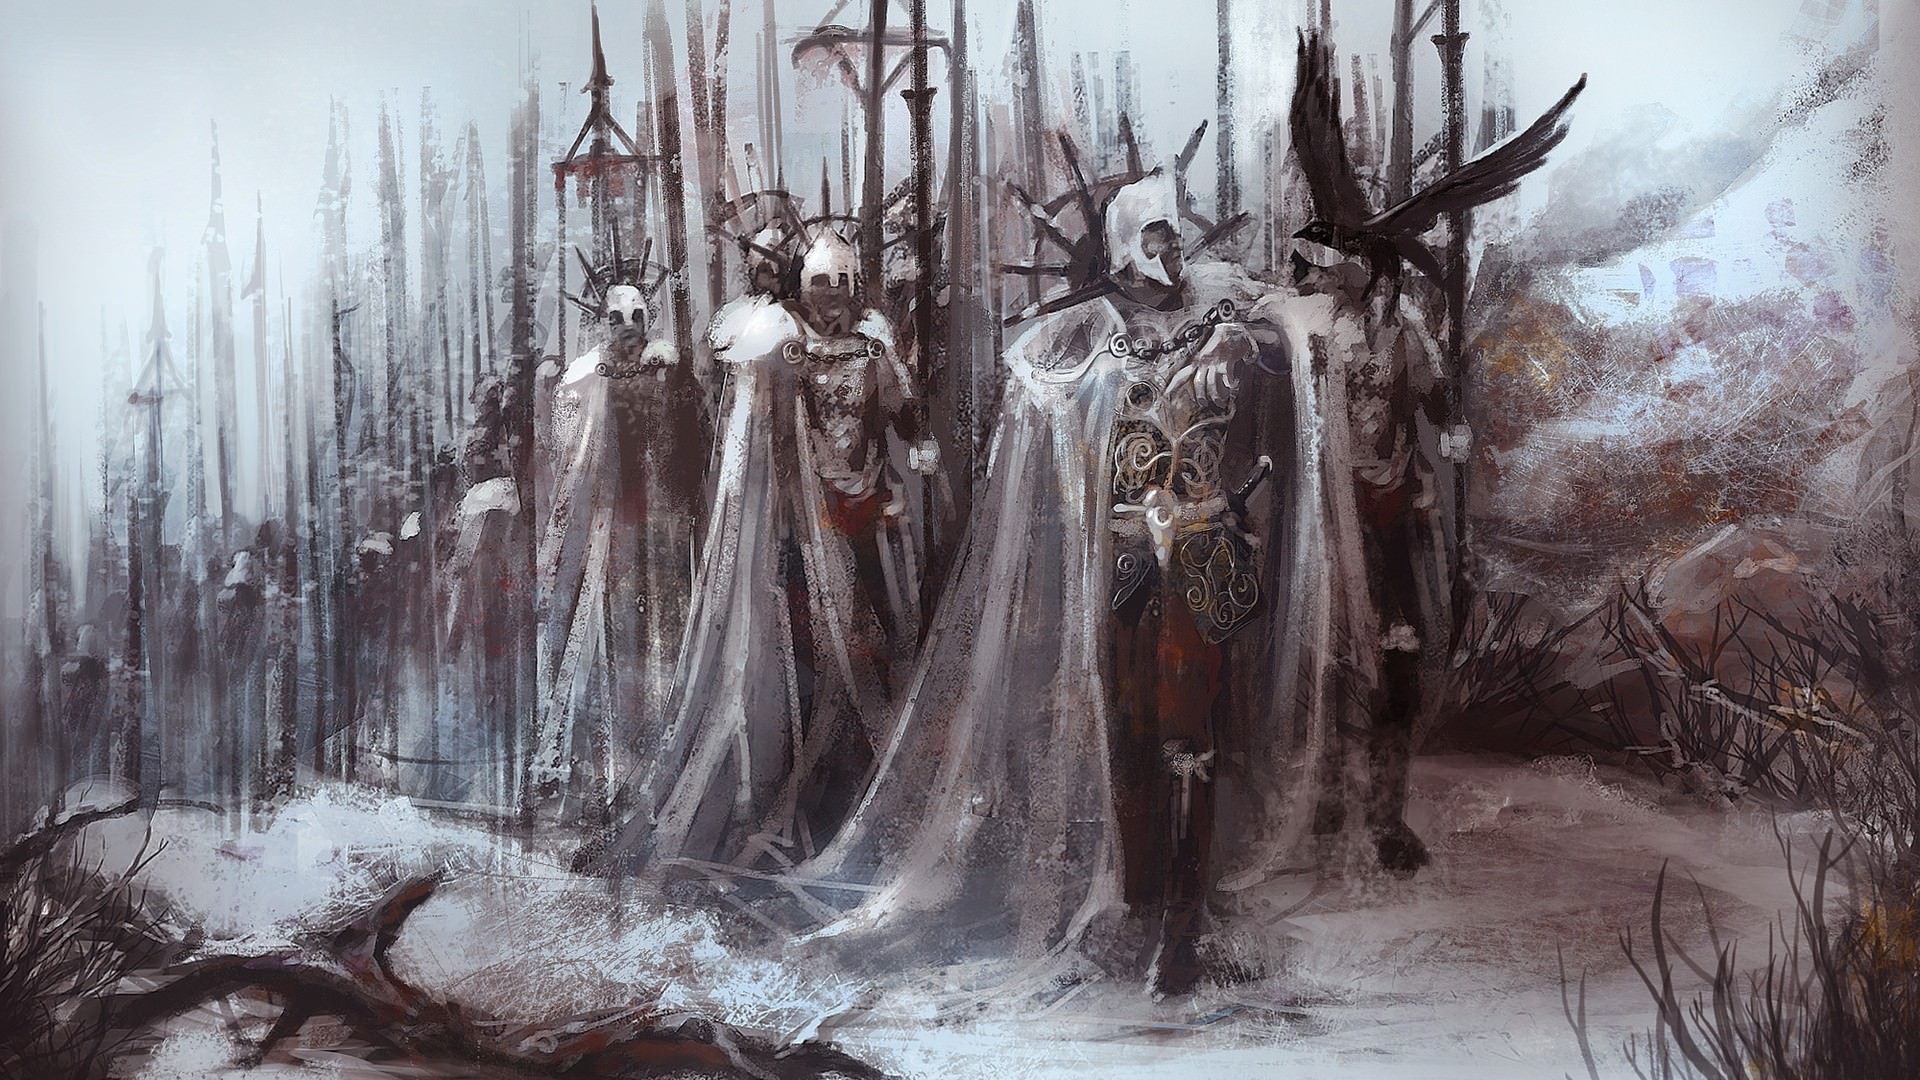 [revised] The Lord Of The Rings Art 1080p Wallpaper - Medieval Army Marching Art , HD Wallpaper & Backgrounds